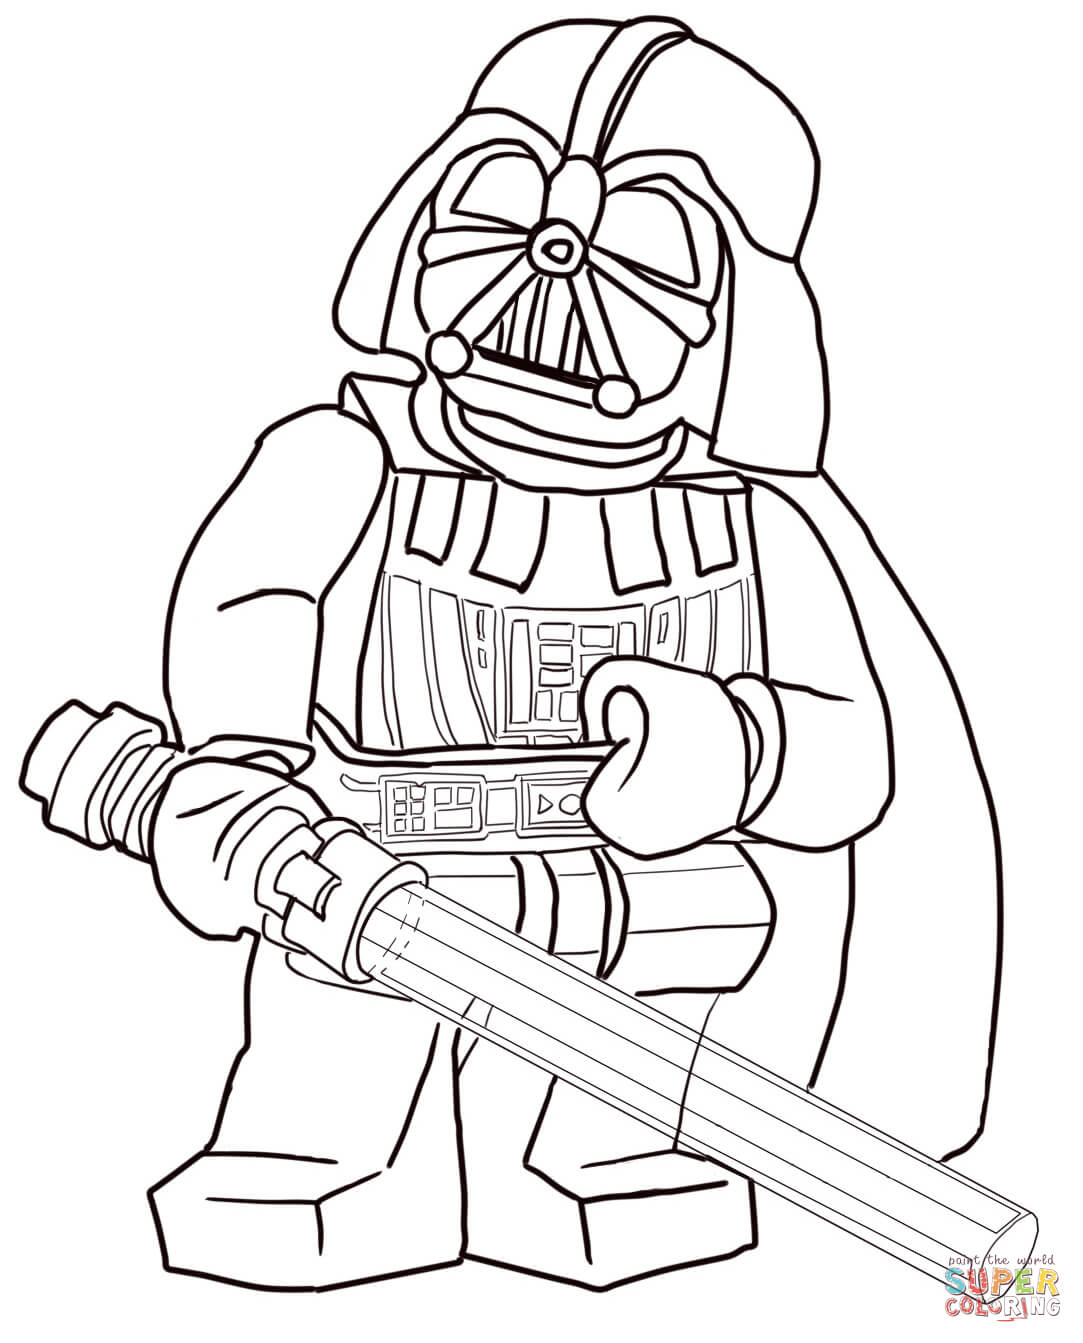 Darth vader coloring pages to download and print for free